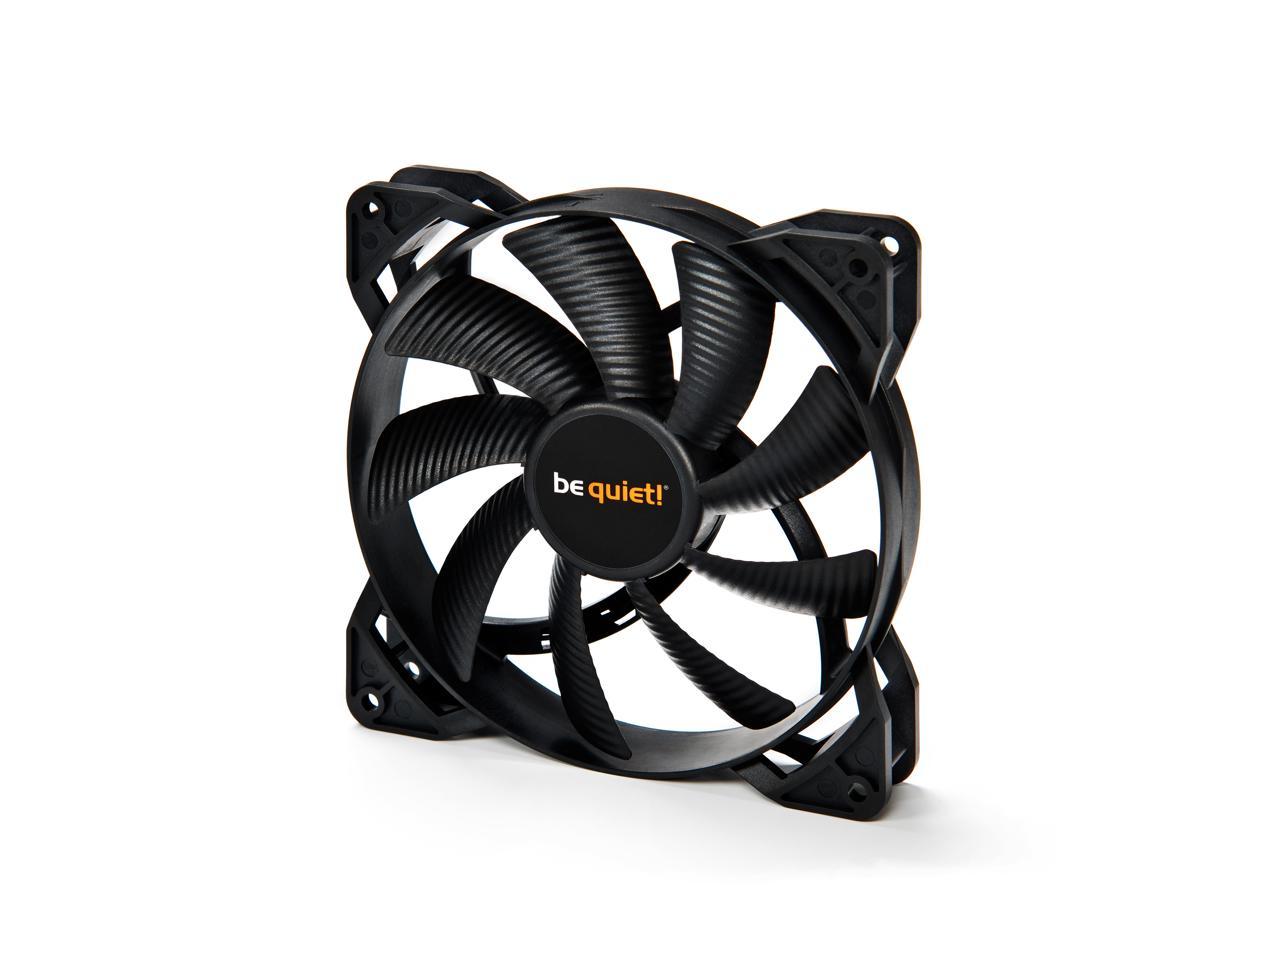 be quiet! Pure Wings 2 120mm PWM high-speed, silent case fans $8.40 + FS at Newegg